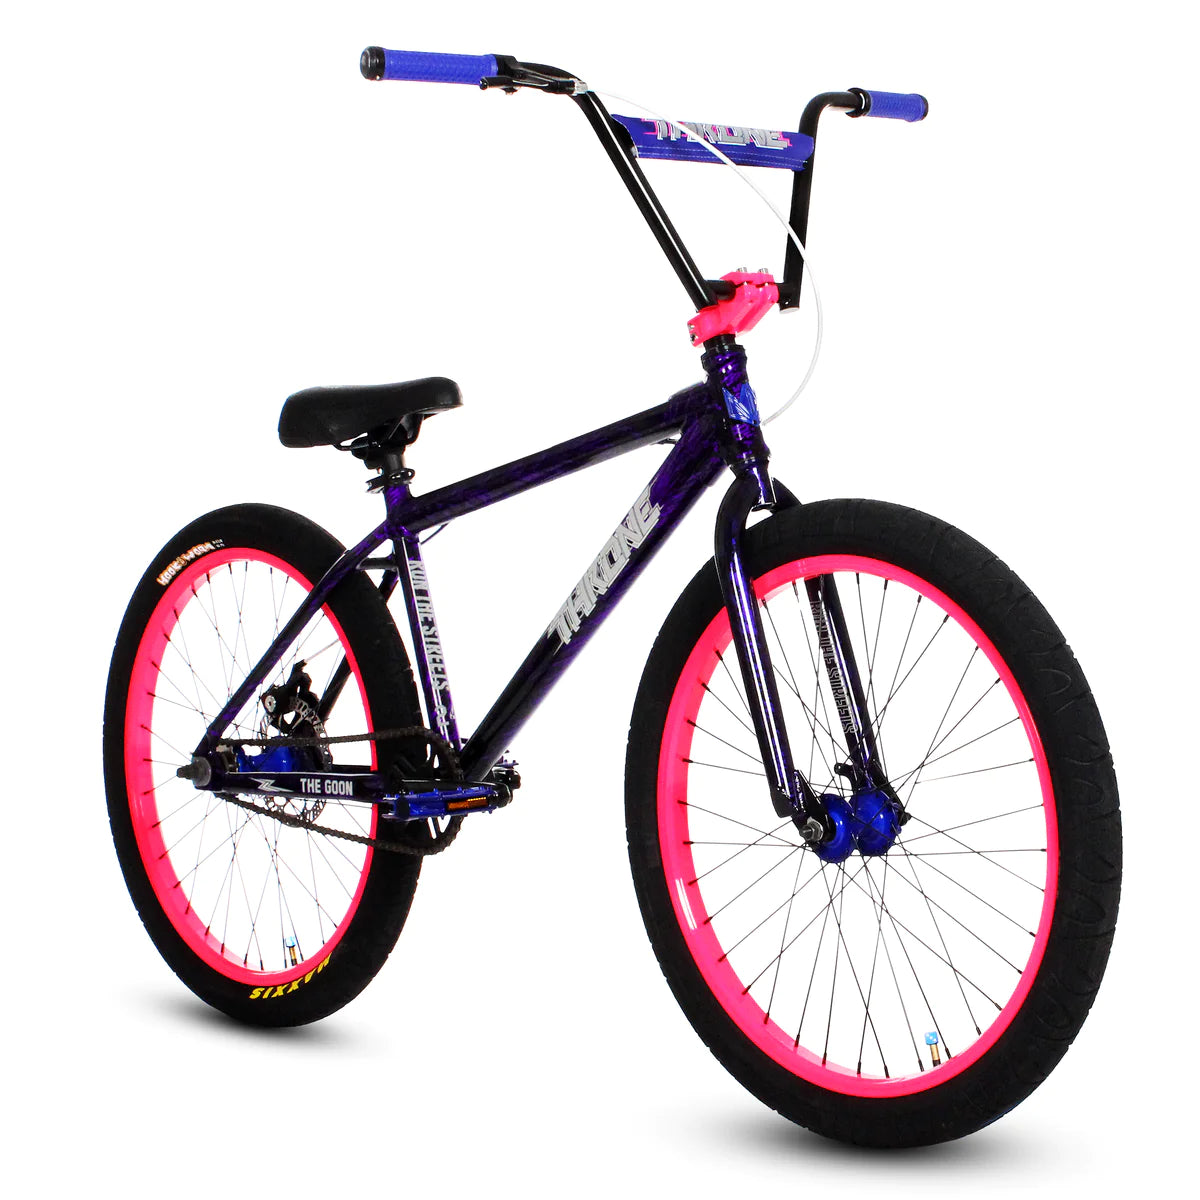 Throne Cycles The Goon -Purple Carnage 24" | Fixed Gear Urban BMX Bike | Urban Bike | The Goon Cycle | Throne Cycle | Street Cycle | Throne BMX | BMX Bike | Bike Lover USA